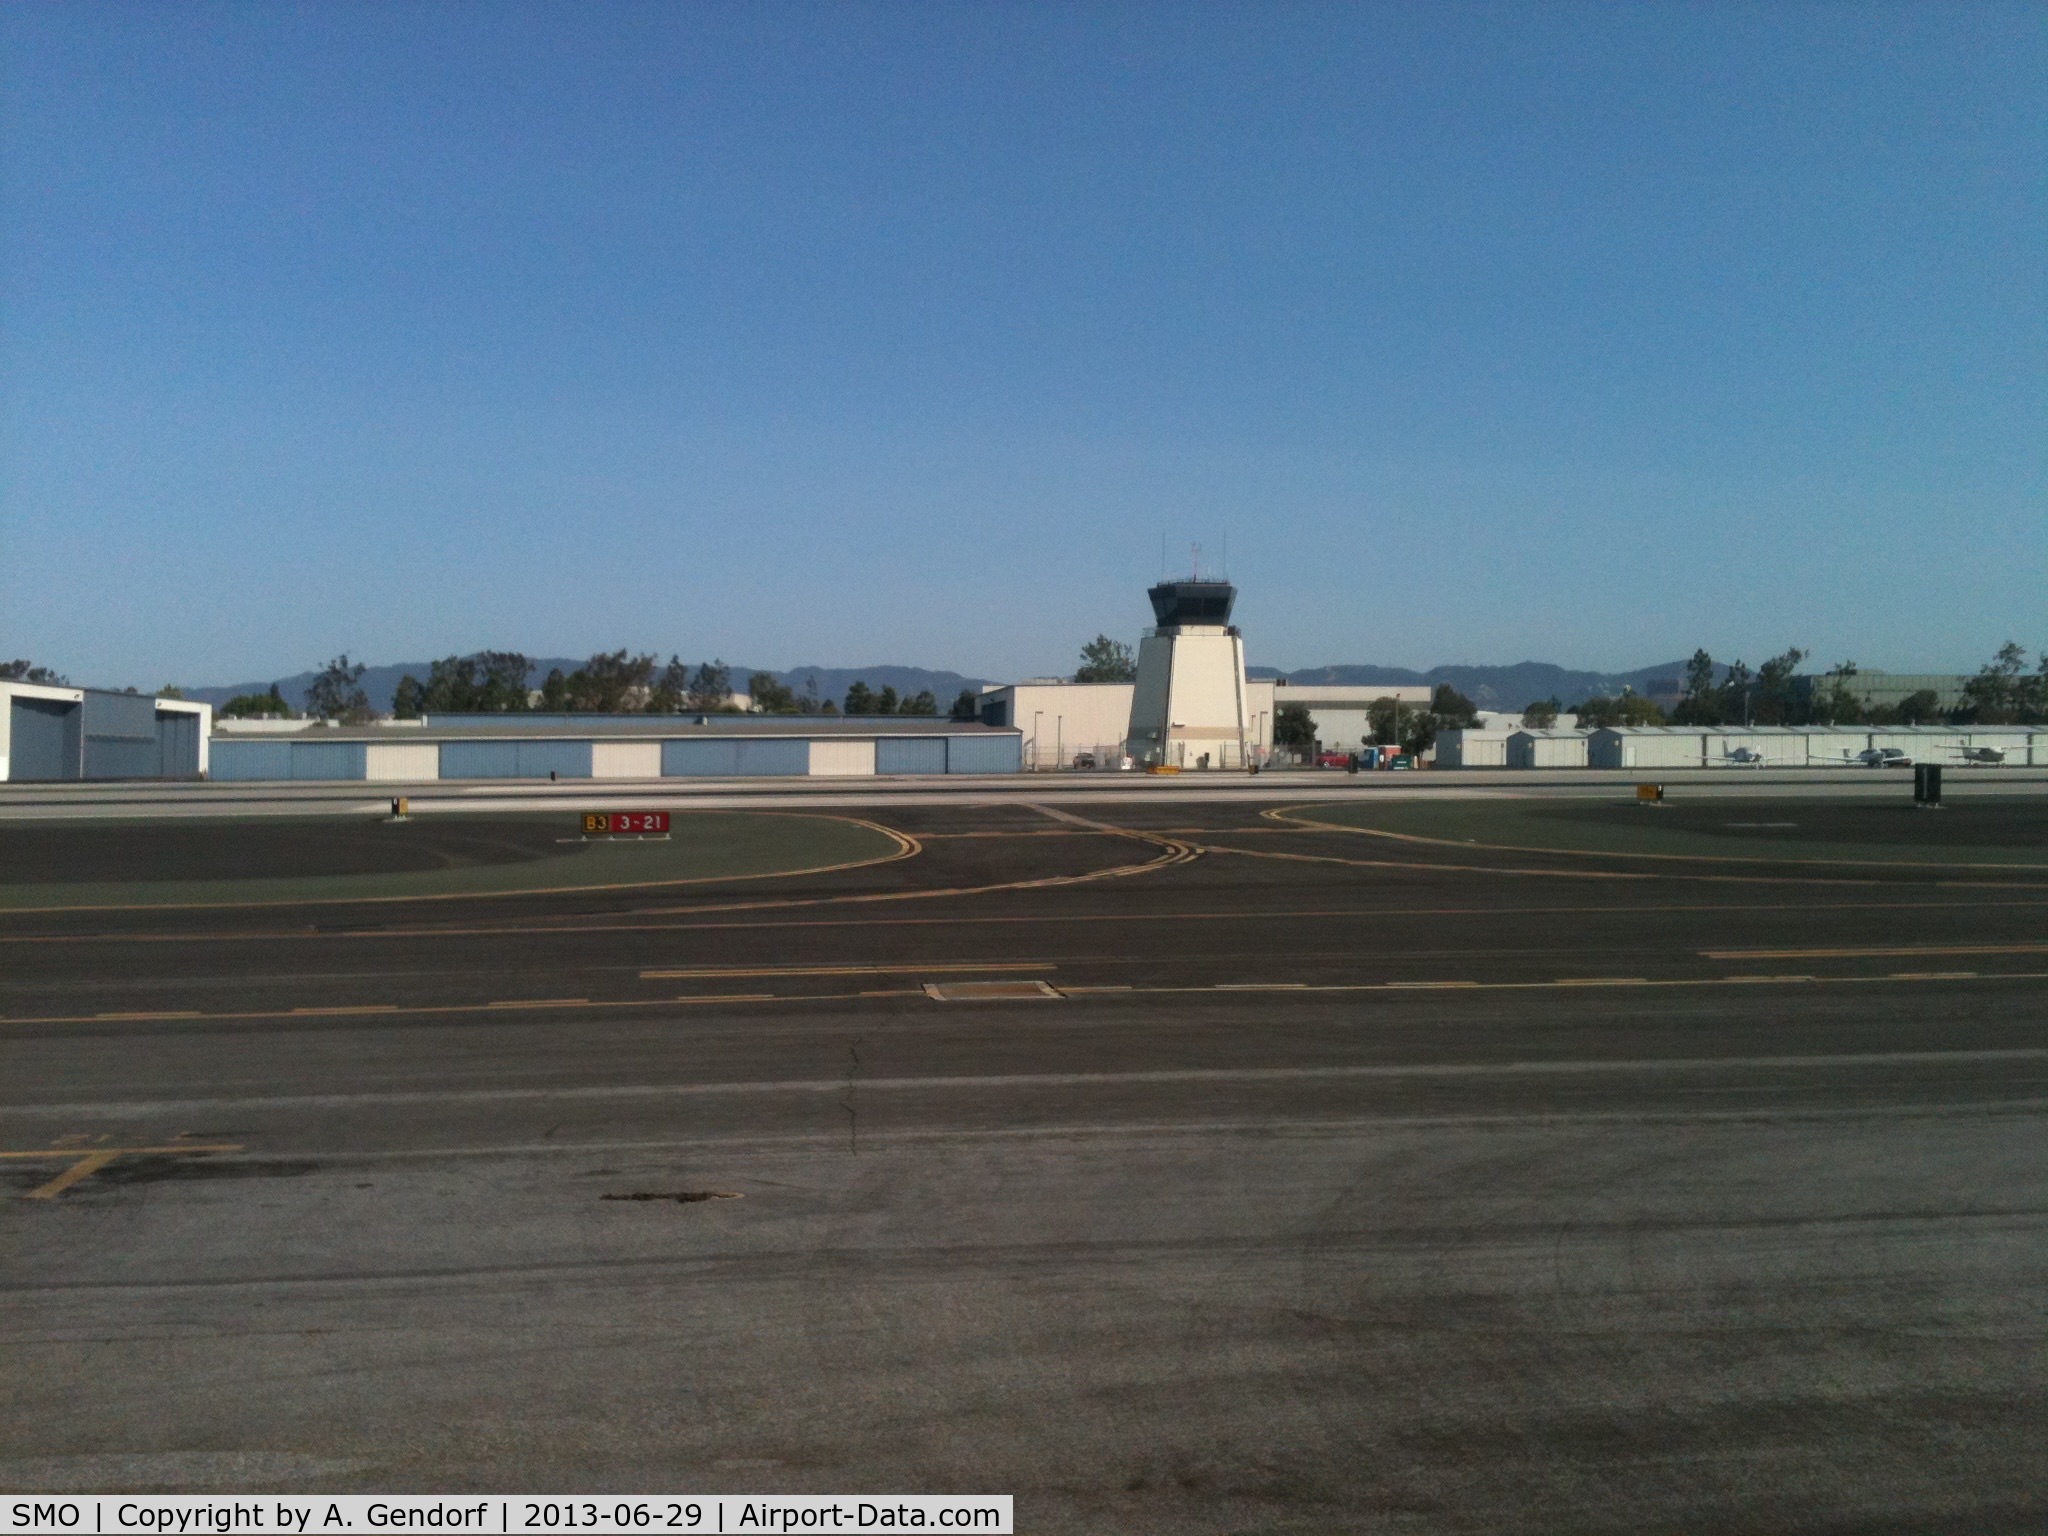 Santa Monica Municipal Airport (SMO) - View over the runway to the tower